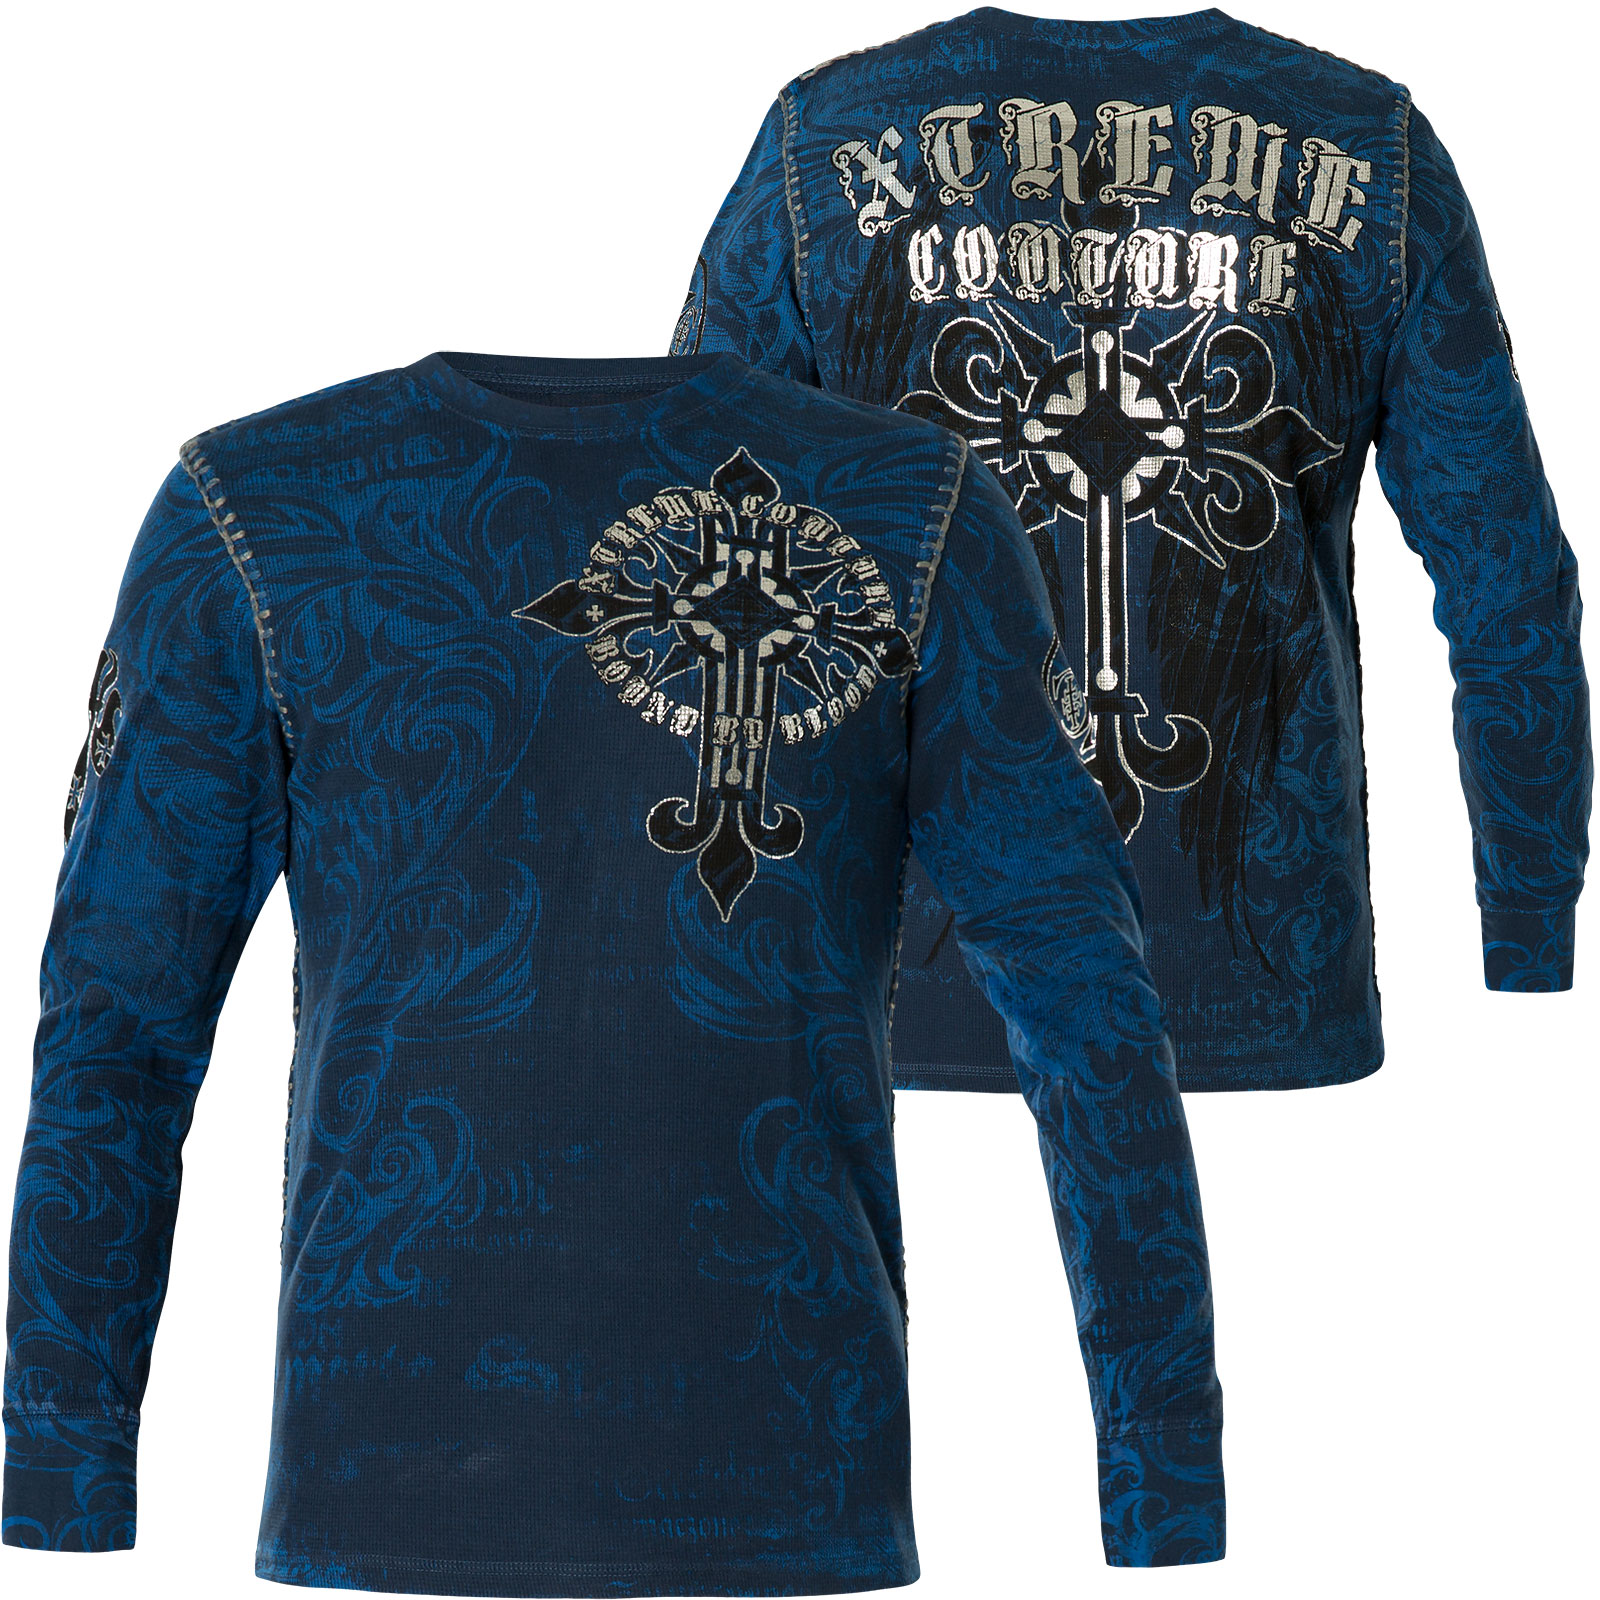 Xtreme Couture by Affliction Thermal Hercules Print with wings and a cross